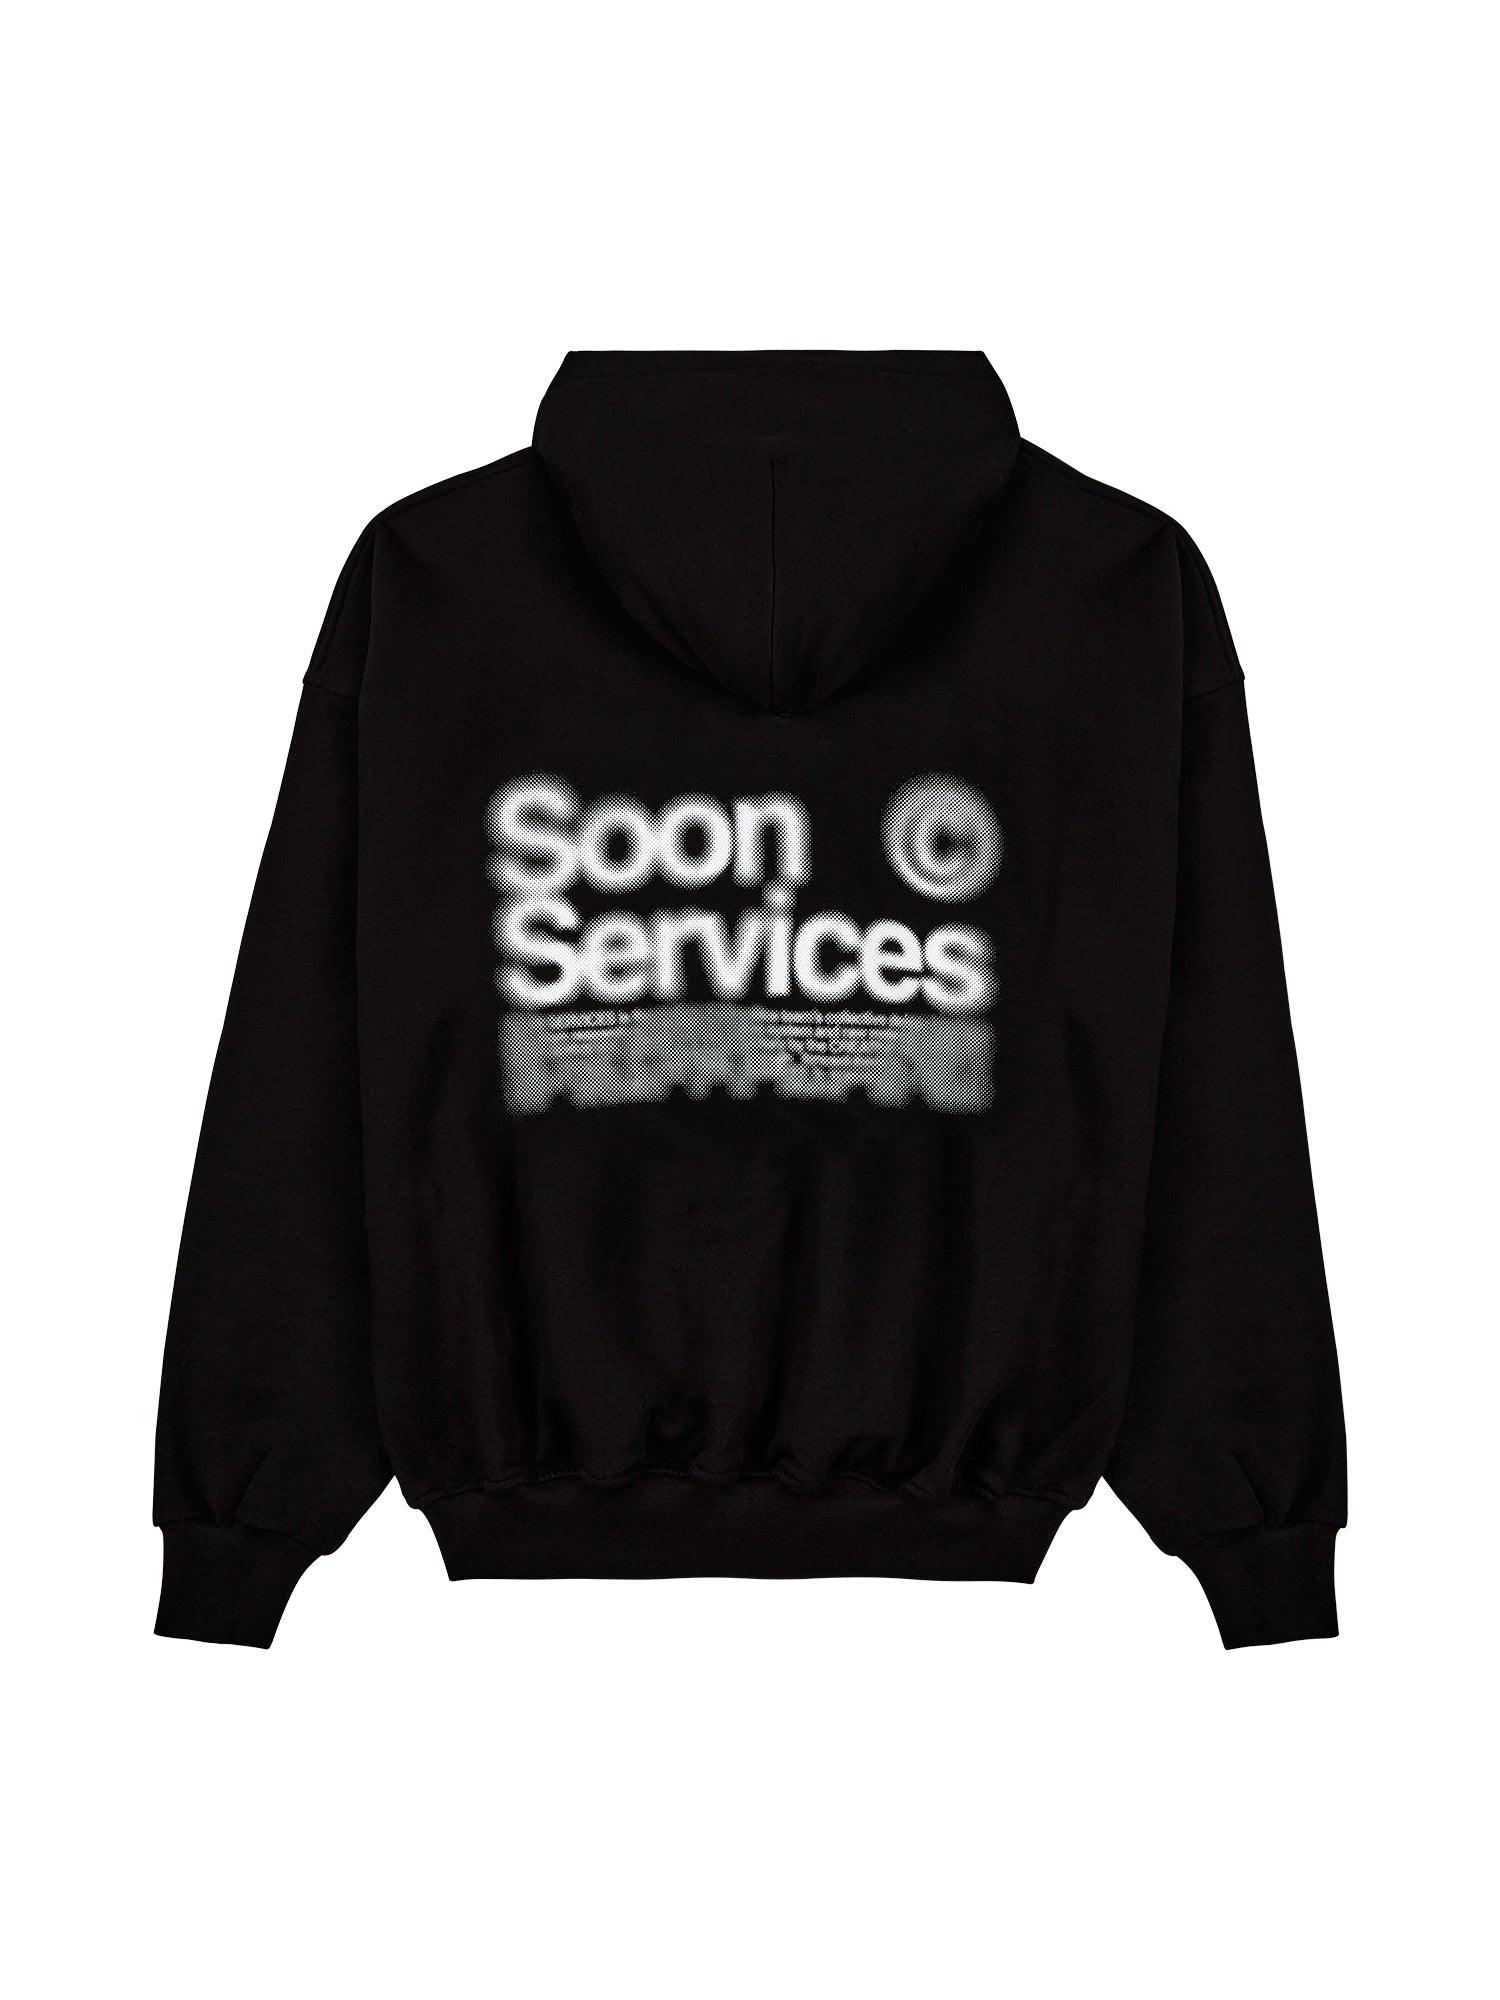 Blurred Vision Hoodie - SOON TO BE ANNOUNCED